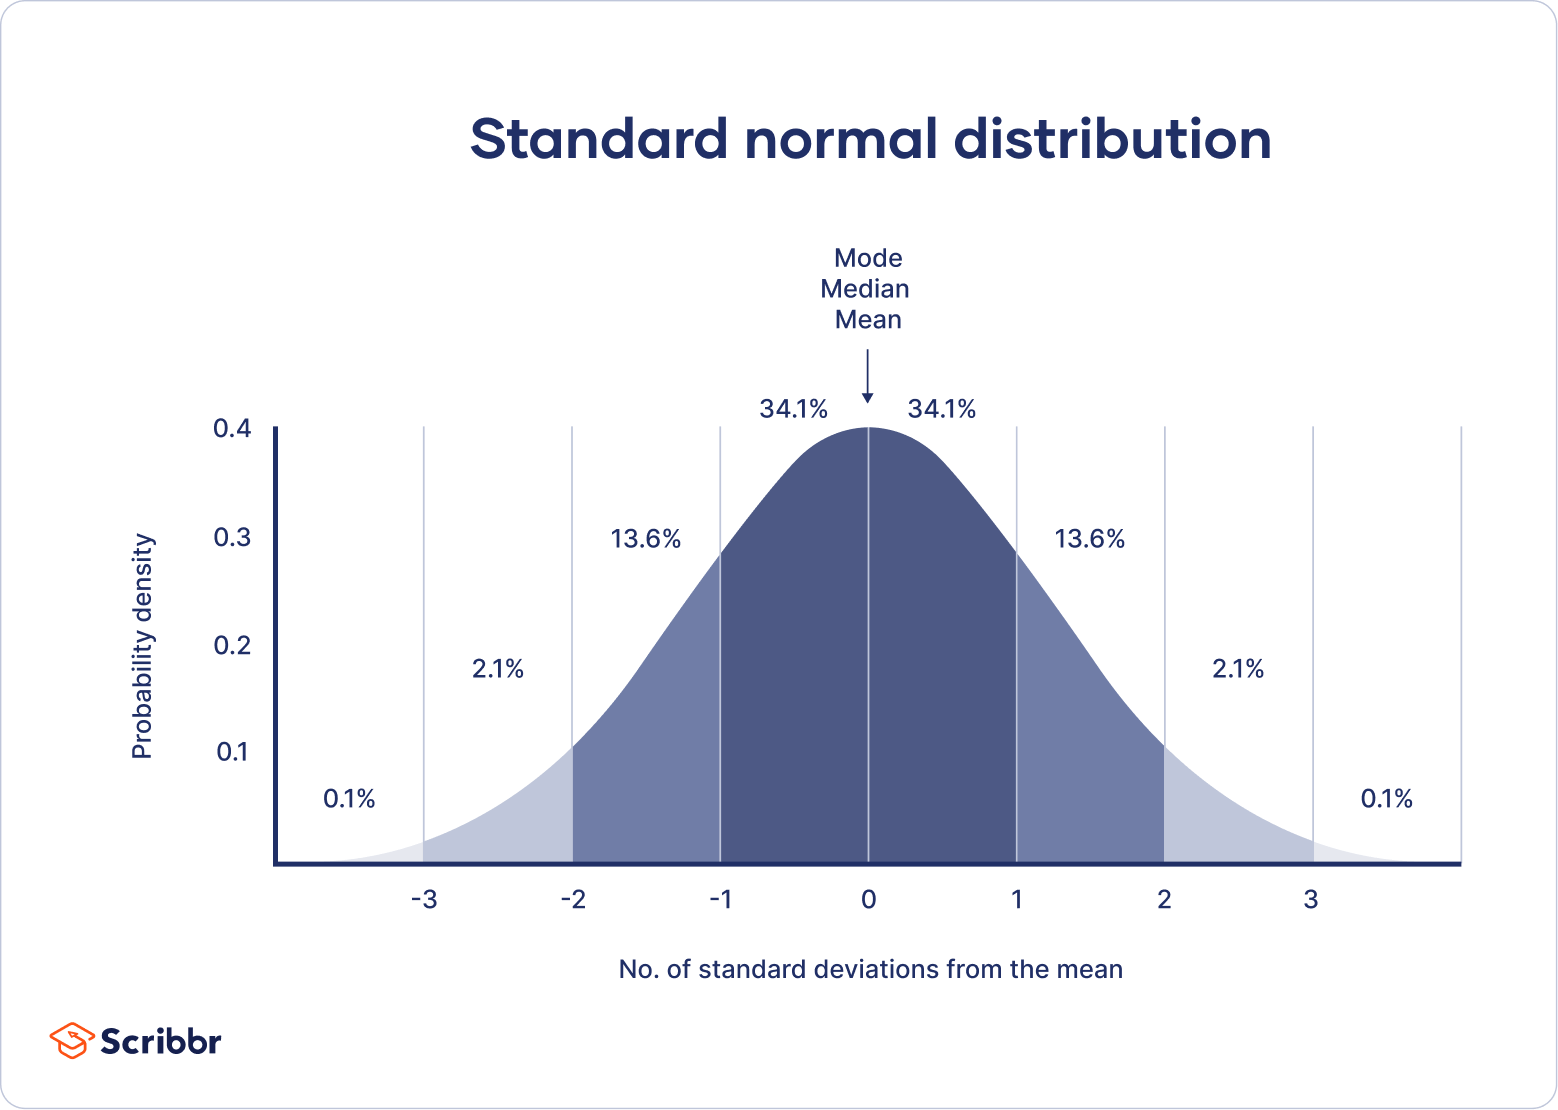 Bell Curve and Normal Distribution Definition